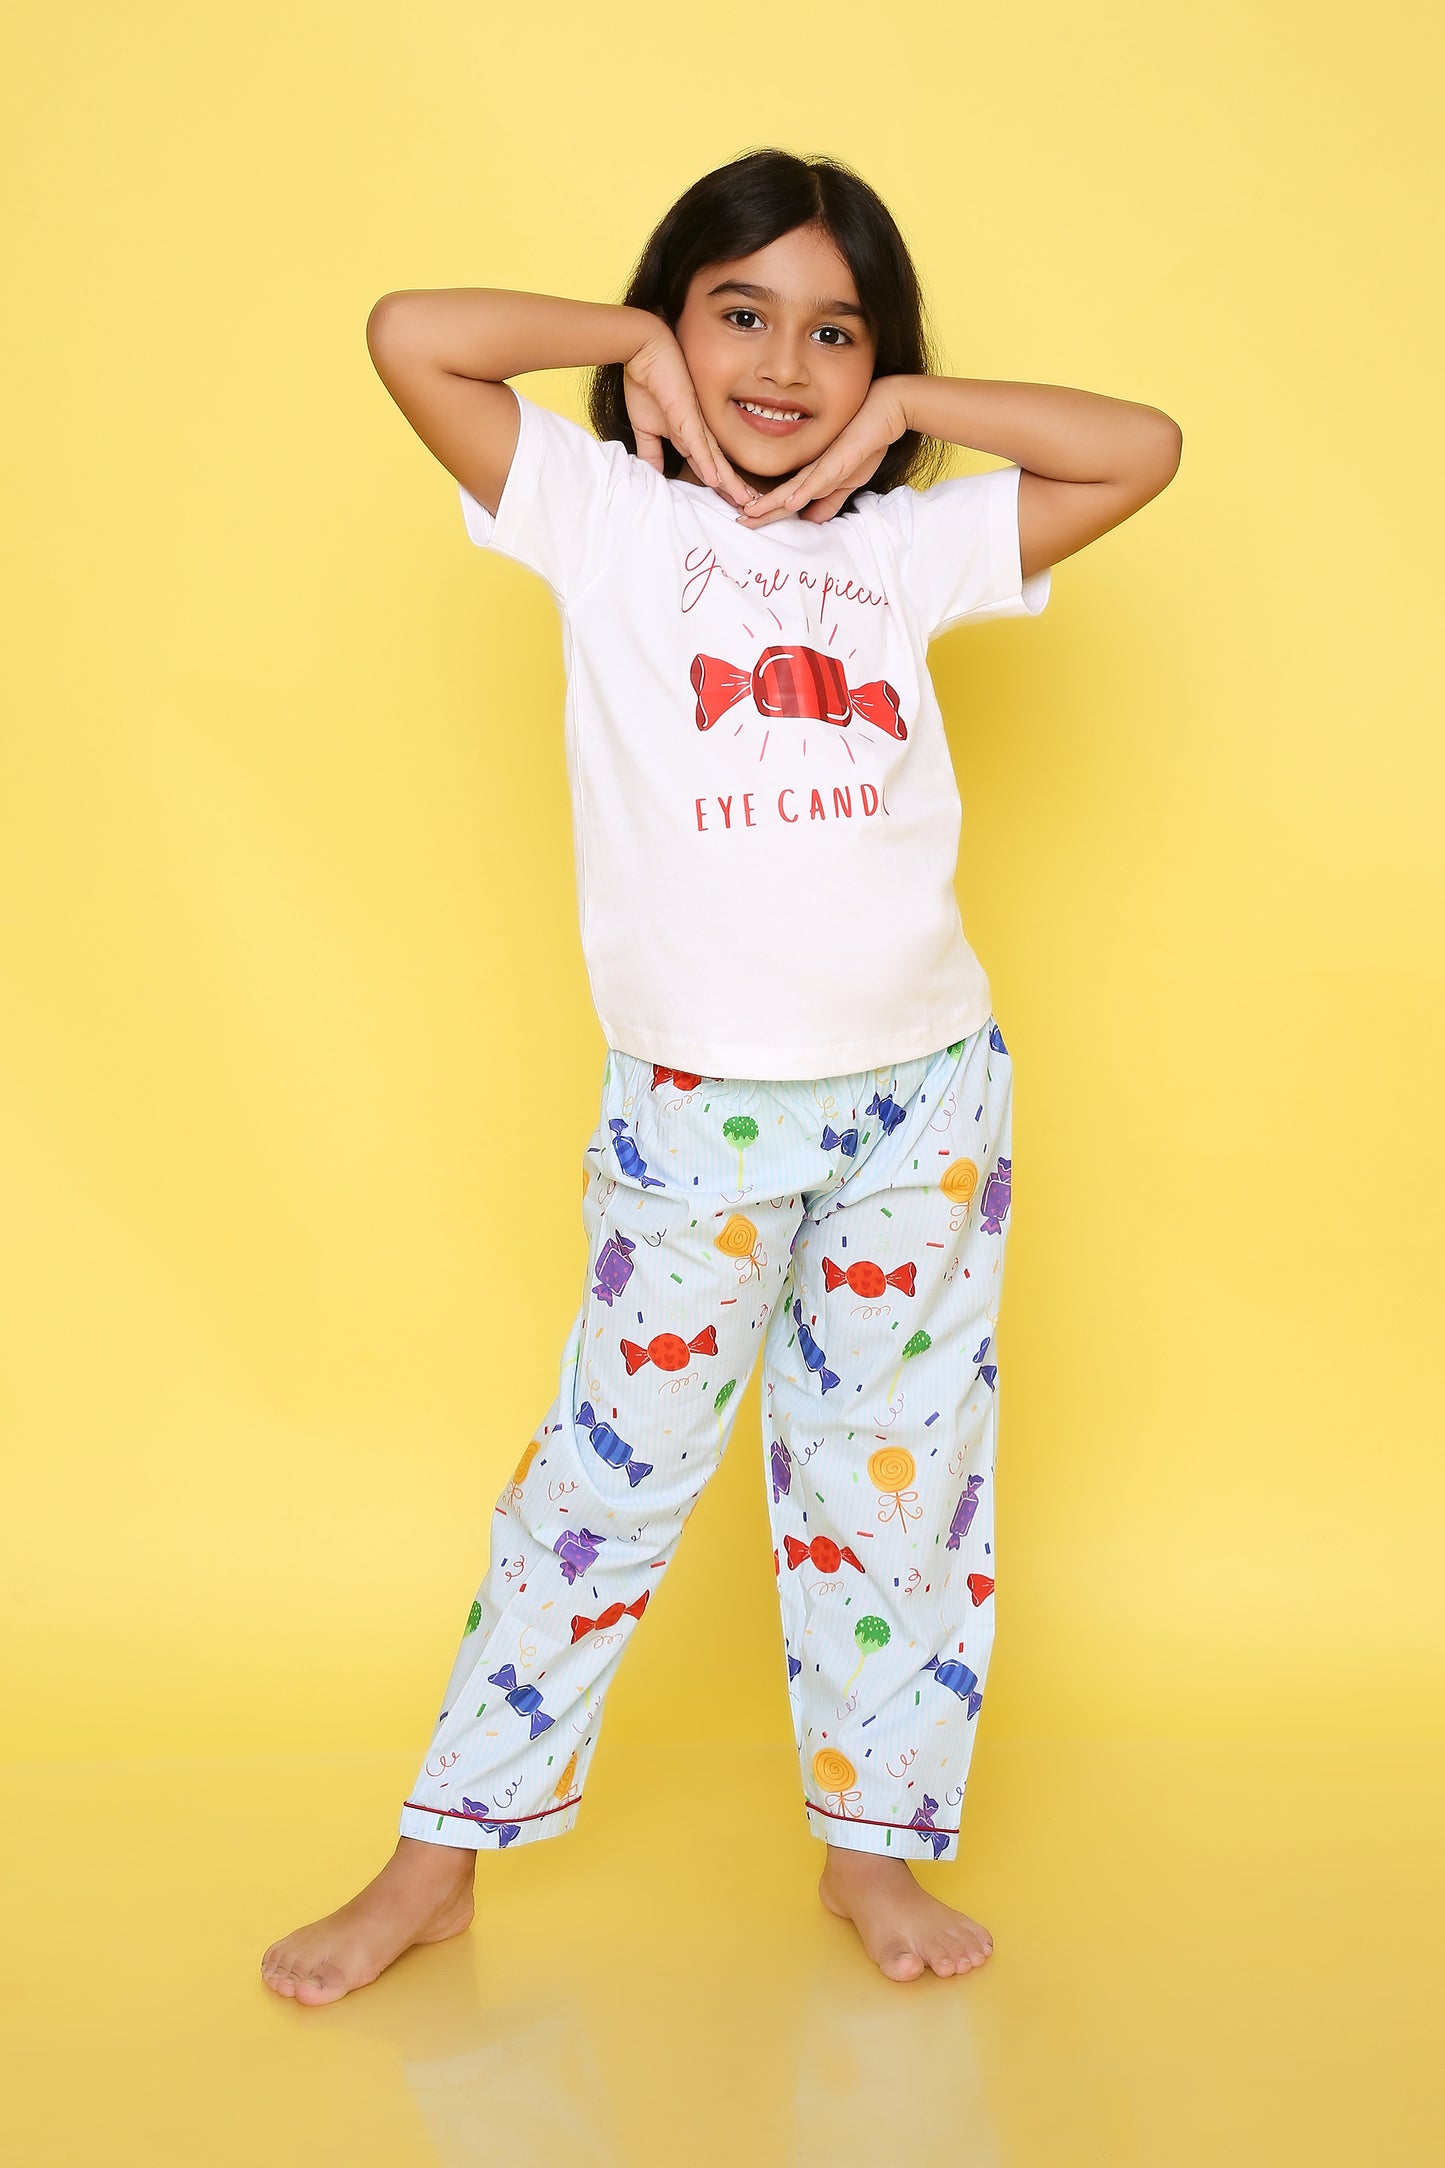 Knitting Doodles Premium Cotton Kids' Night suit with Candy print t-shirt and Pyjama- White and Blue